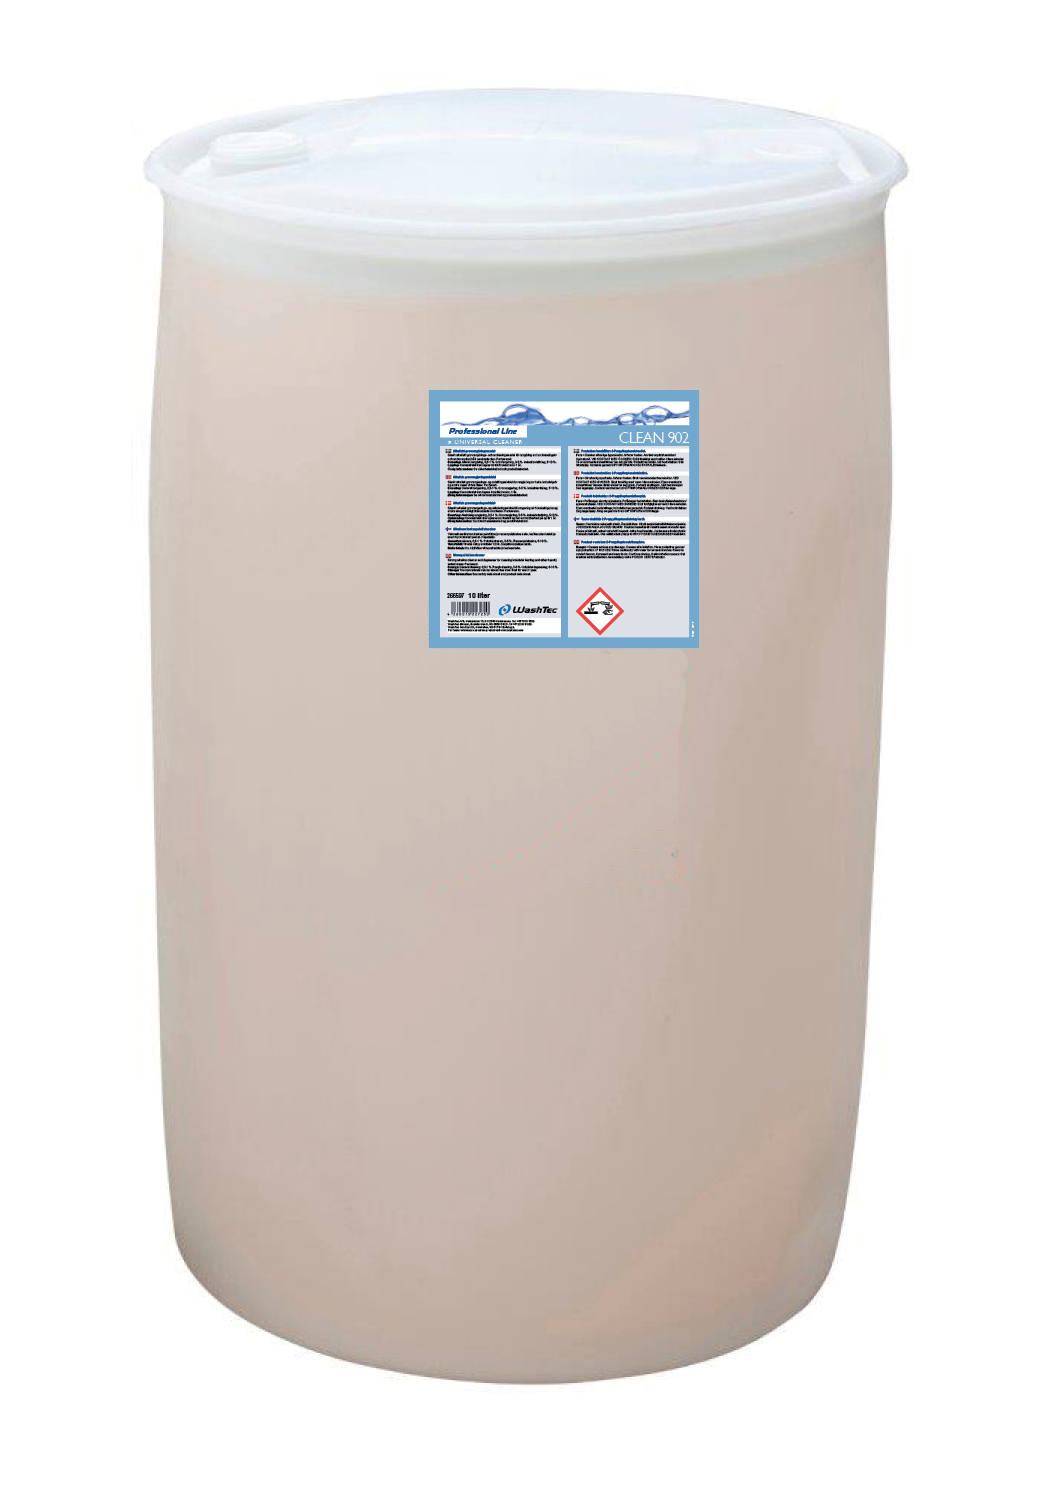 CLEAN 902 - Universal Cleaner 200L 